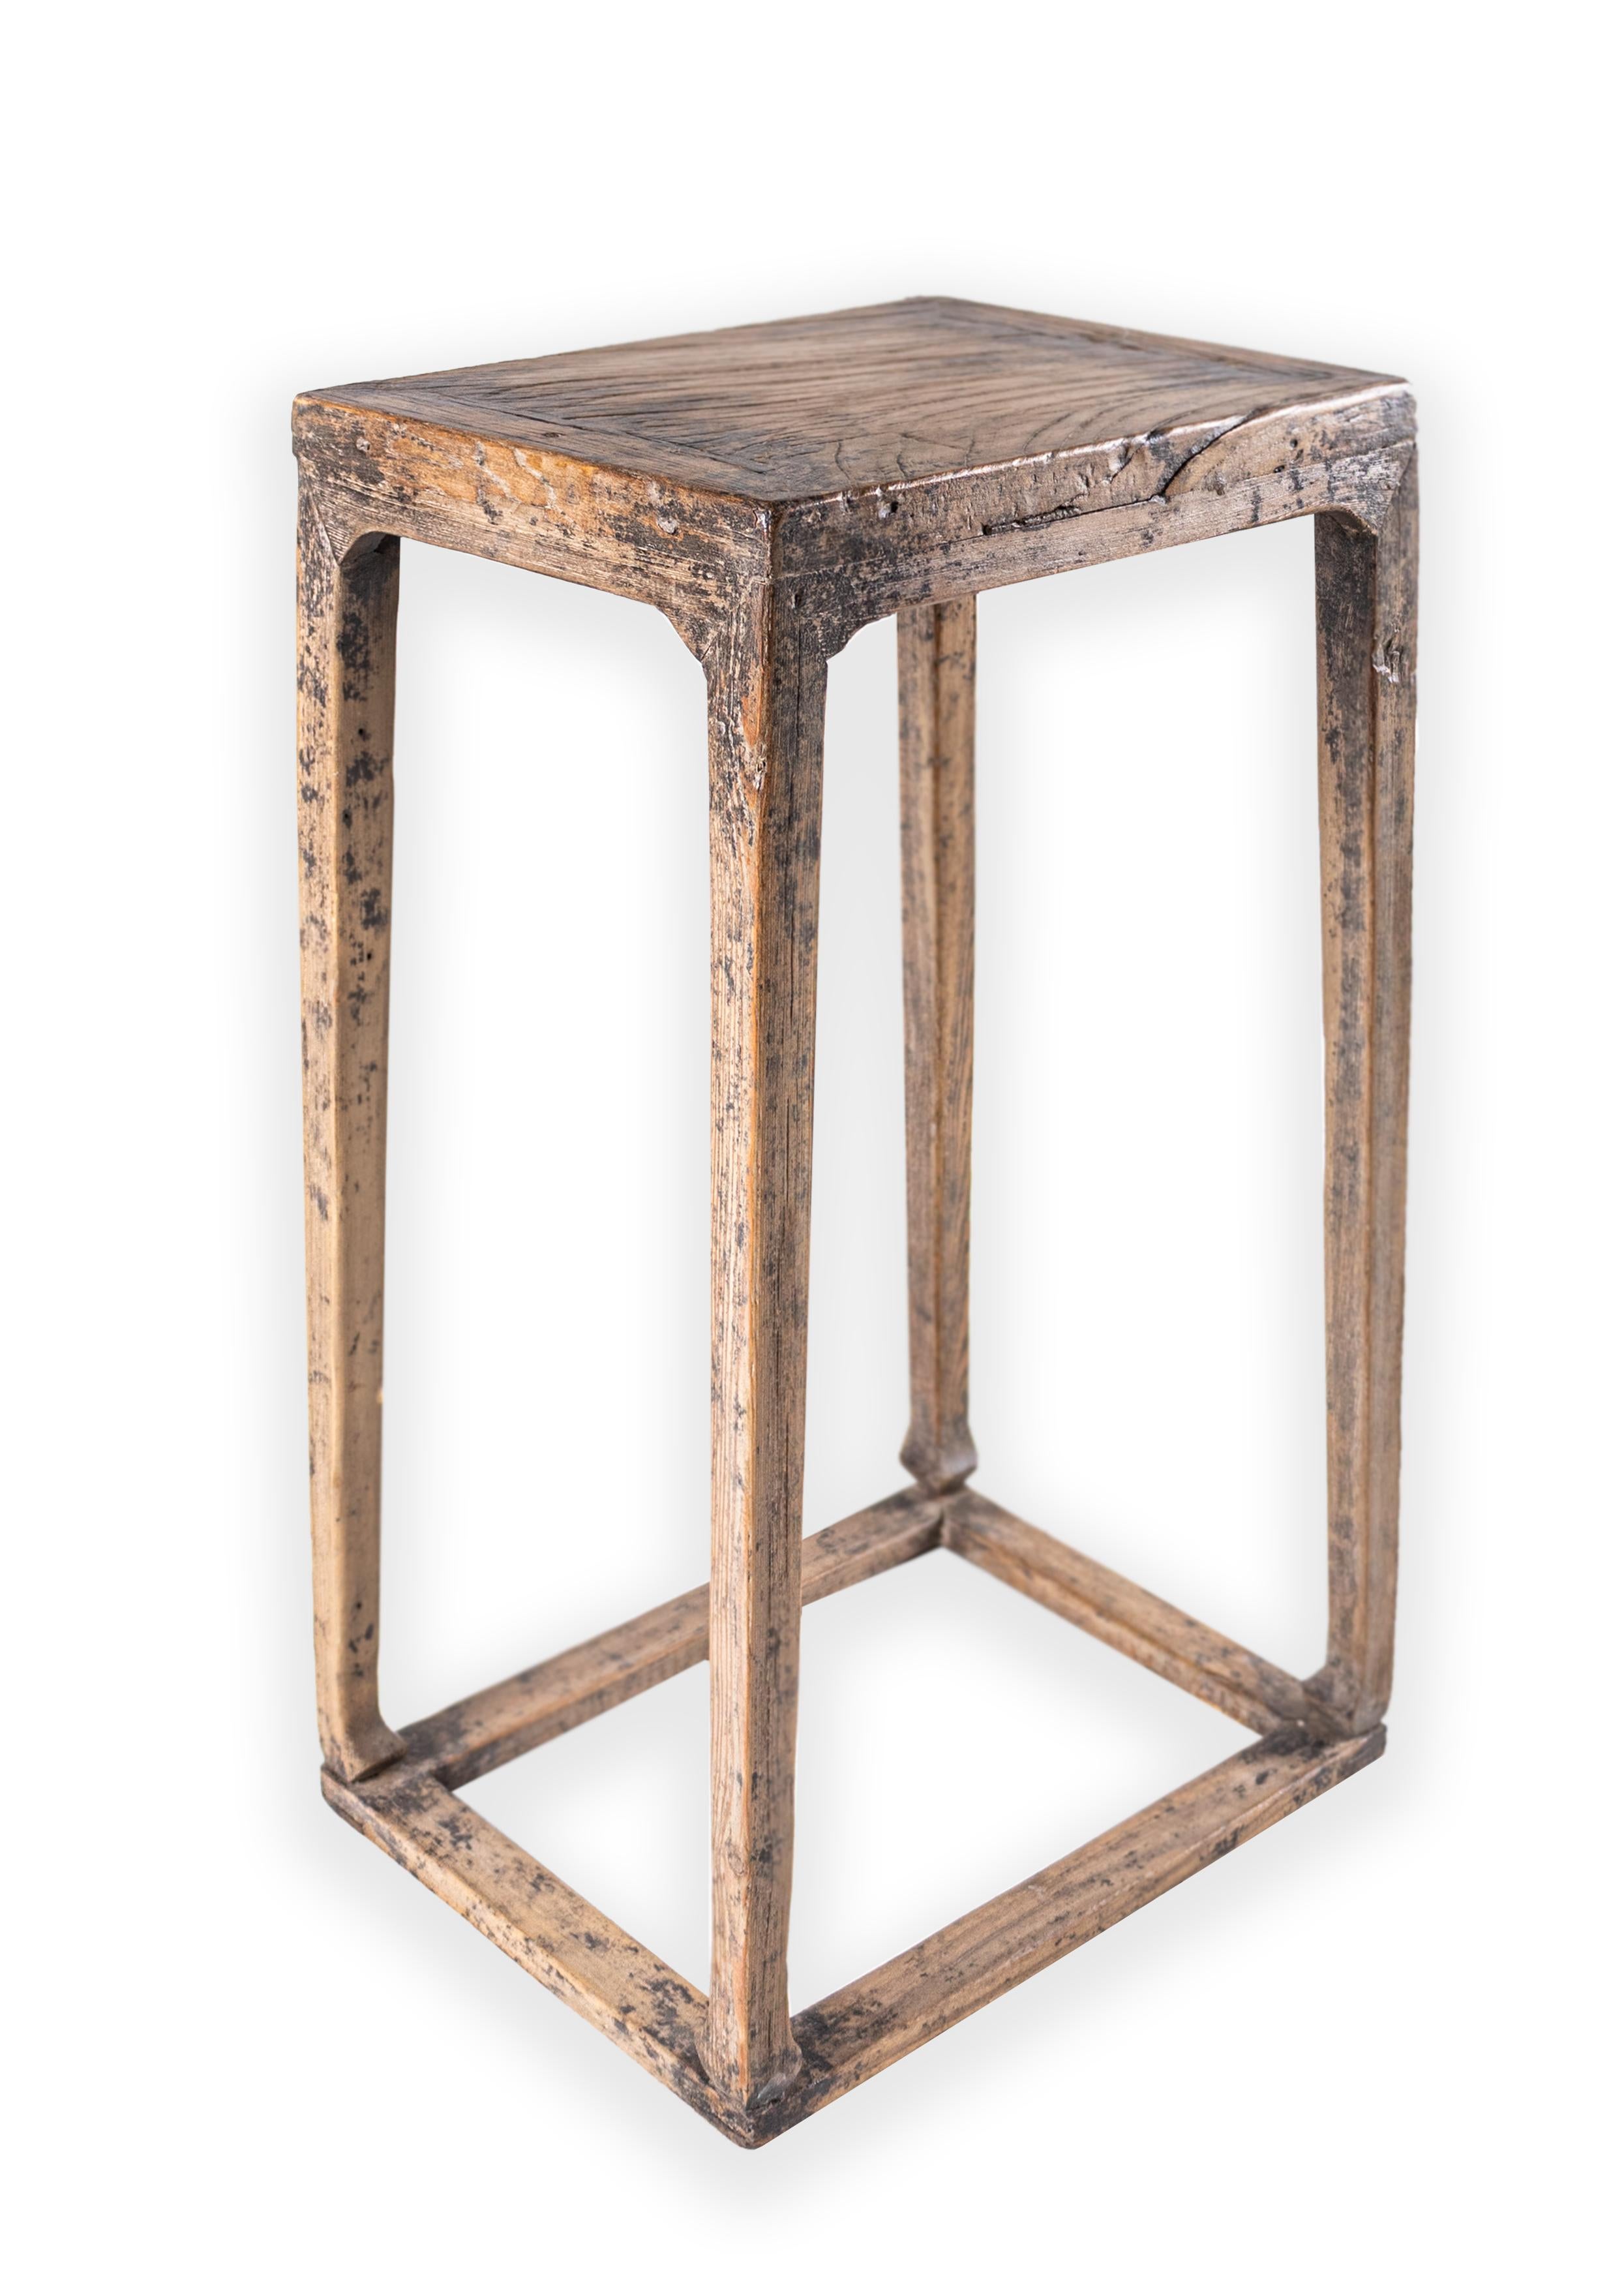 Tall elm wood end table. In my organic, contemporary, vintage and mid-century modern aesthetic

This piece is a part of Brendan Bass’s one-of-a-kind collection, Le Monde. French for “The World”, the Le Monde collection is made up of rare and hard to